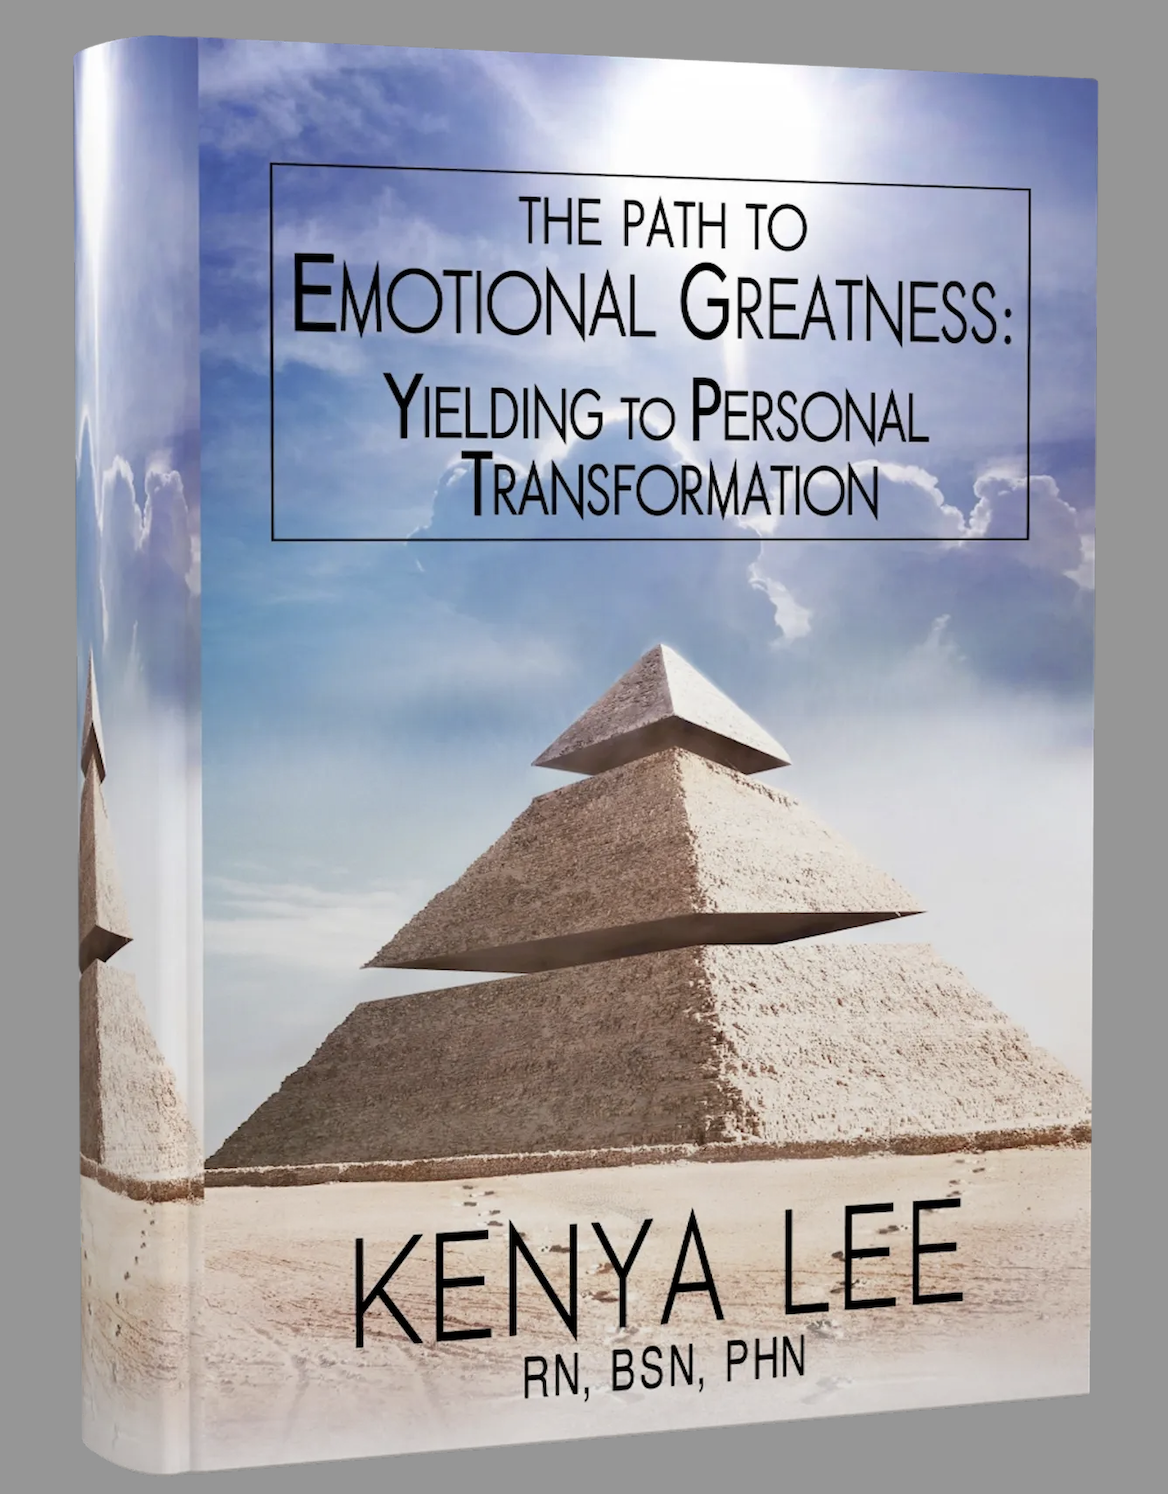 The Path to Emotional Greatness: Kenya Lee's Insightful and Inspirational New Book